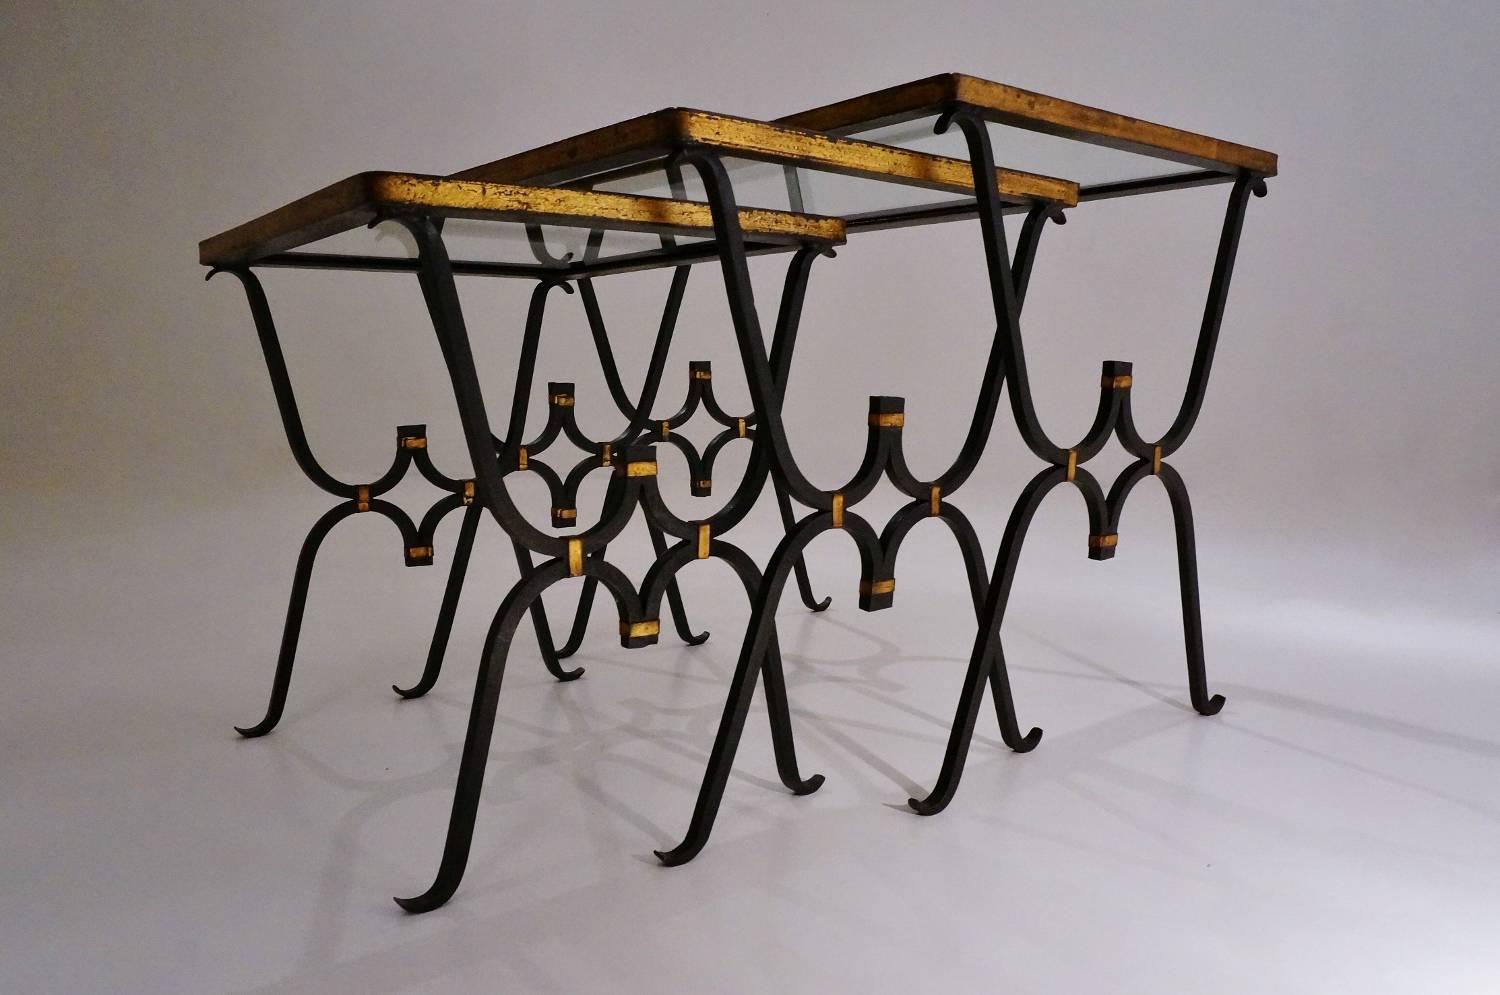 Rene Drouet nesting tables, iron and bronze frames with original glass tops, circa 1950s, French.

These tables have been gently cleaned respecting the vintage patina.

These vintage tables are in the style of Rene Drouet. The hand-forged iron